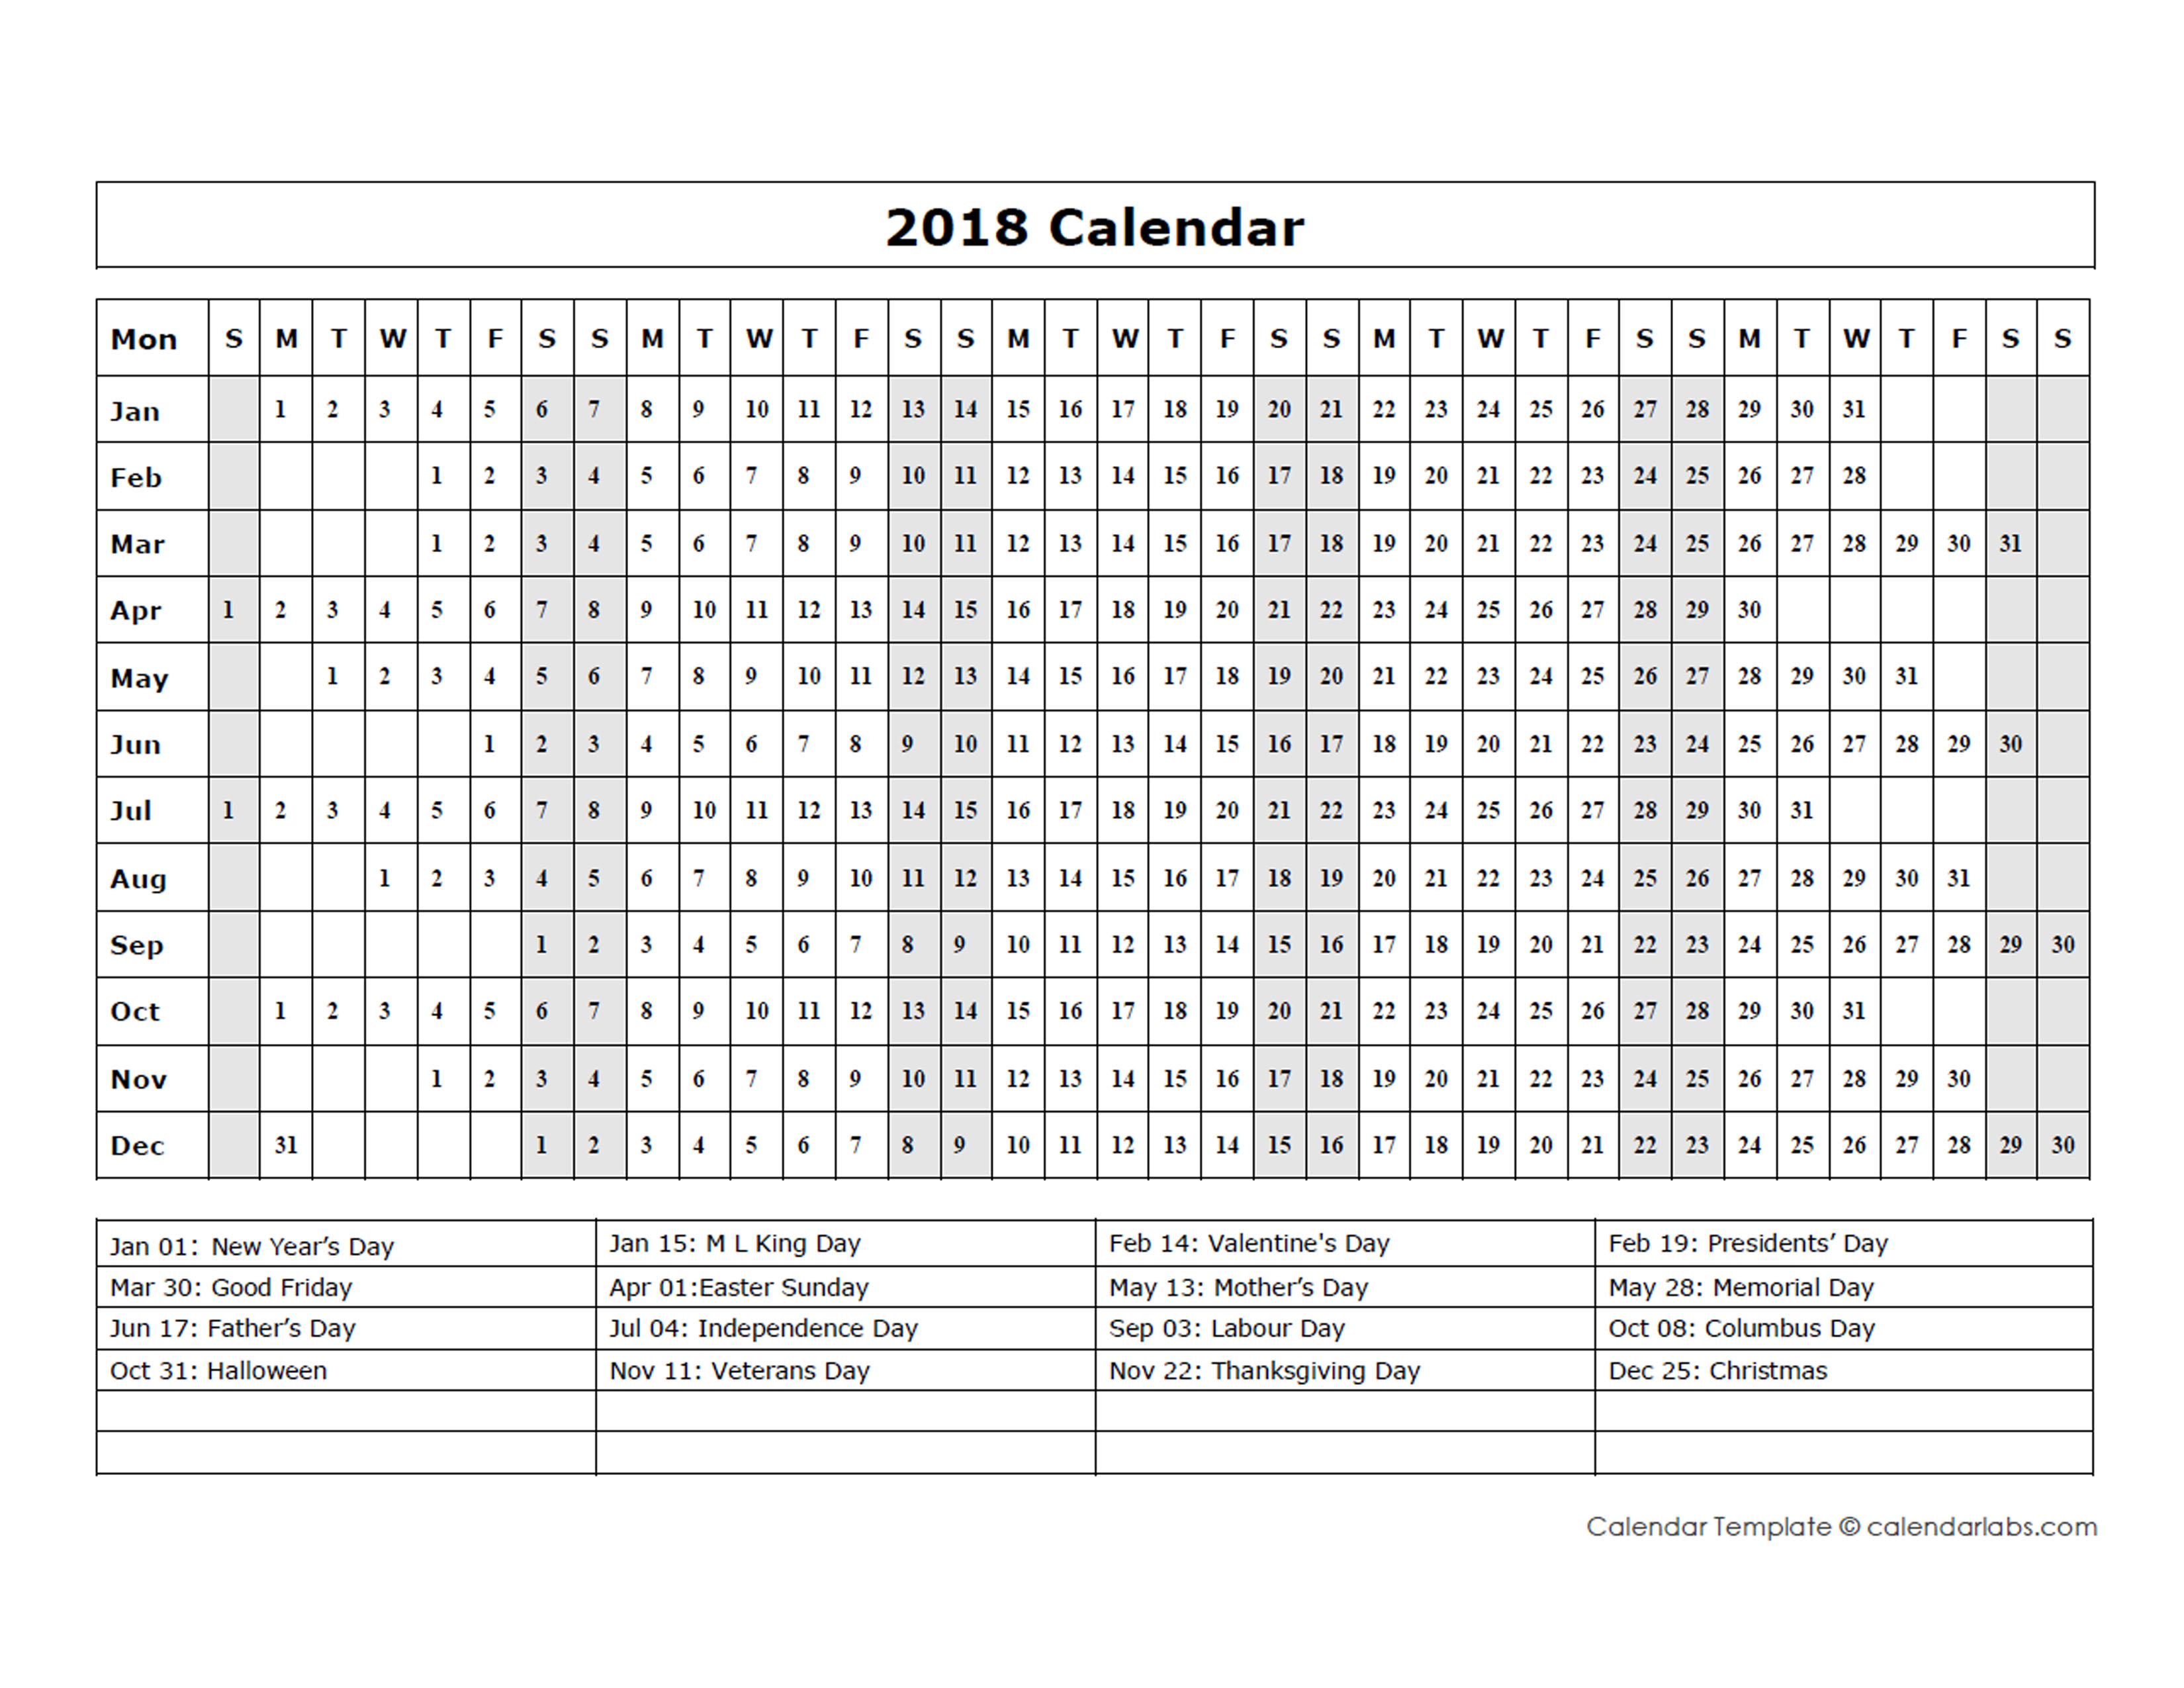 2018 Calendar Template Year At A Glance Free Printable